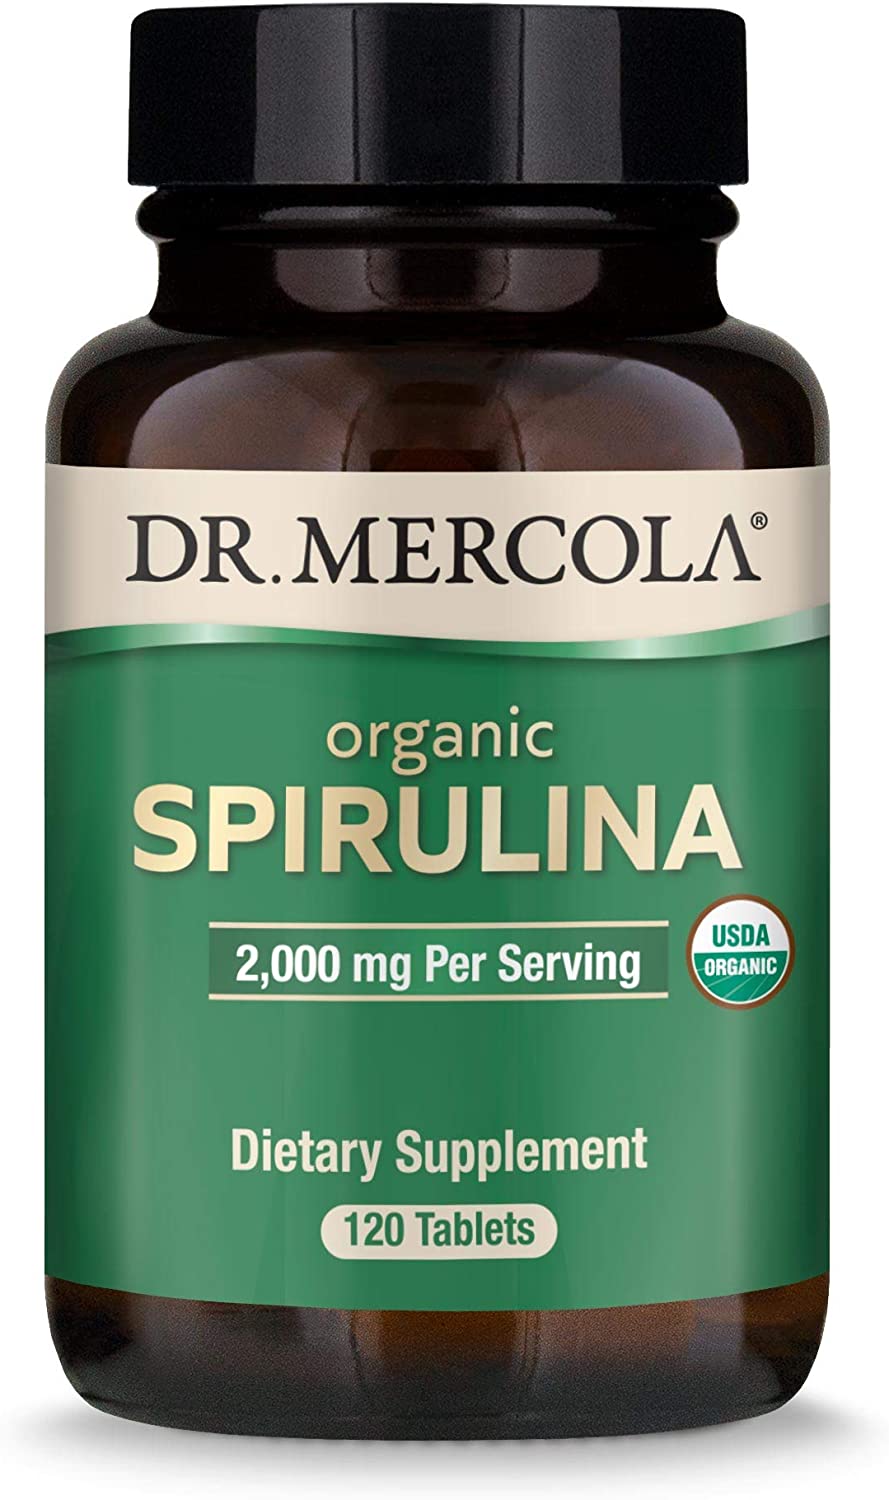 Dr. Mercola Organic Spirulina Dietary Supplement, 2,000 mg per Serving, 30 Servings (120 Tablets), Supports Normal Immune and Inflammatory Responses*, Gluten Free, USDA Organic...